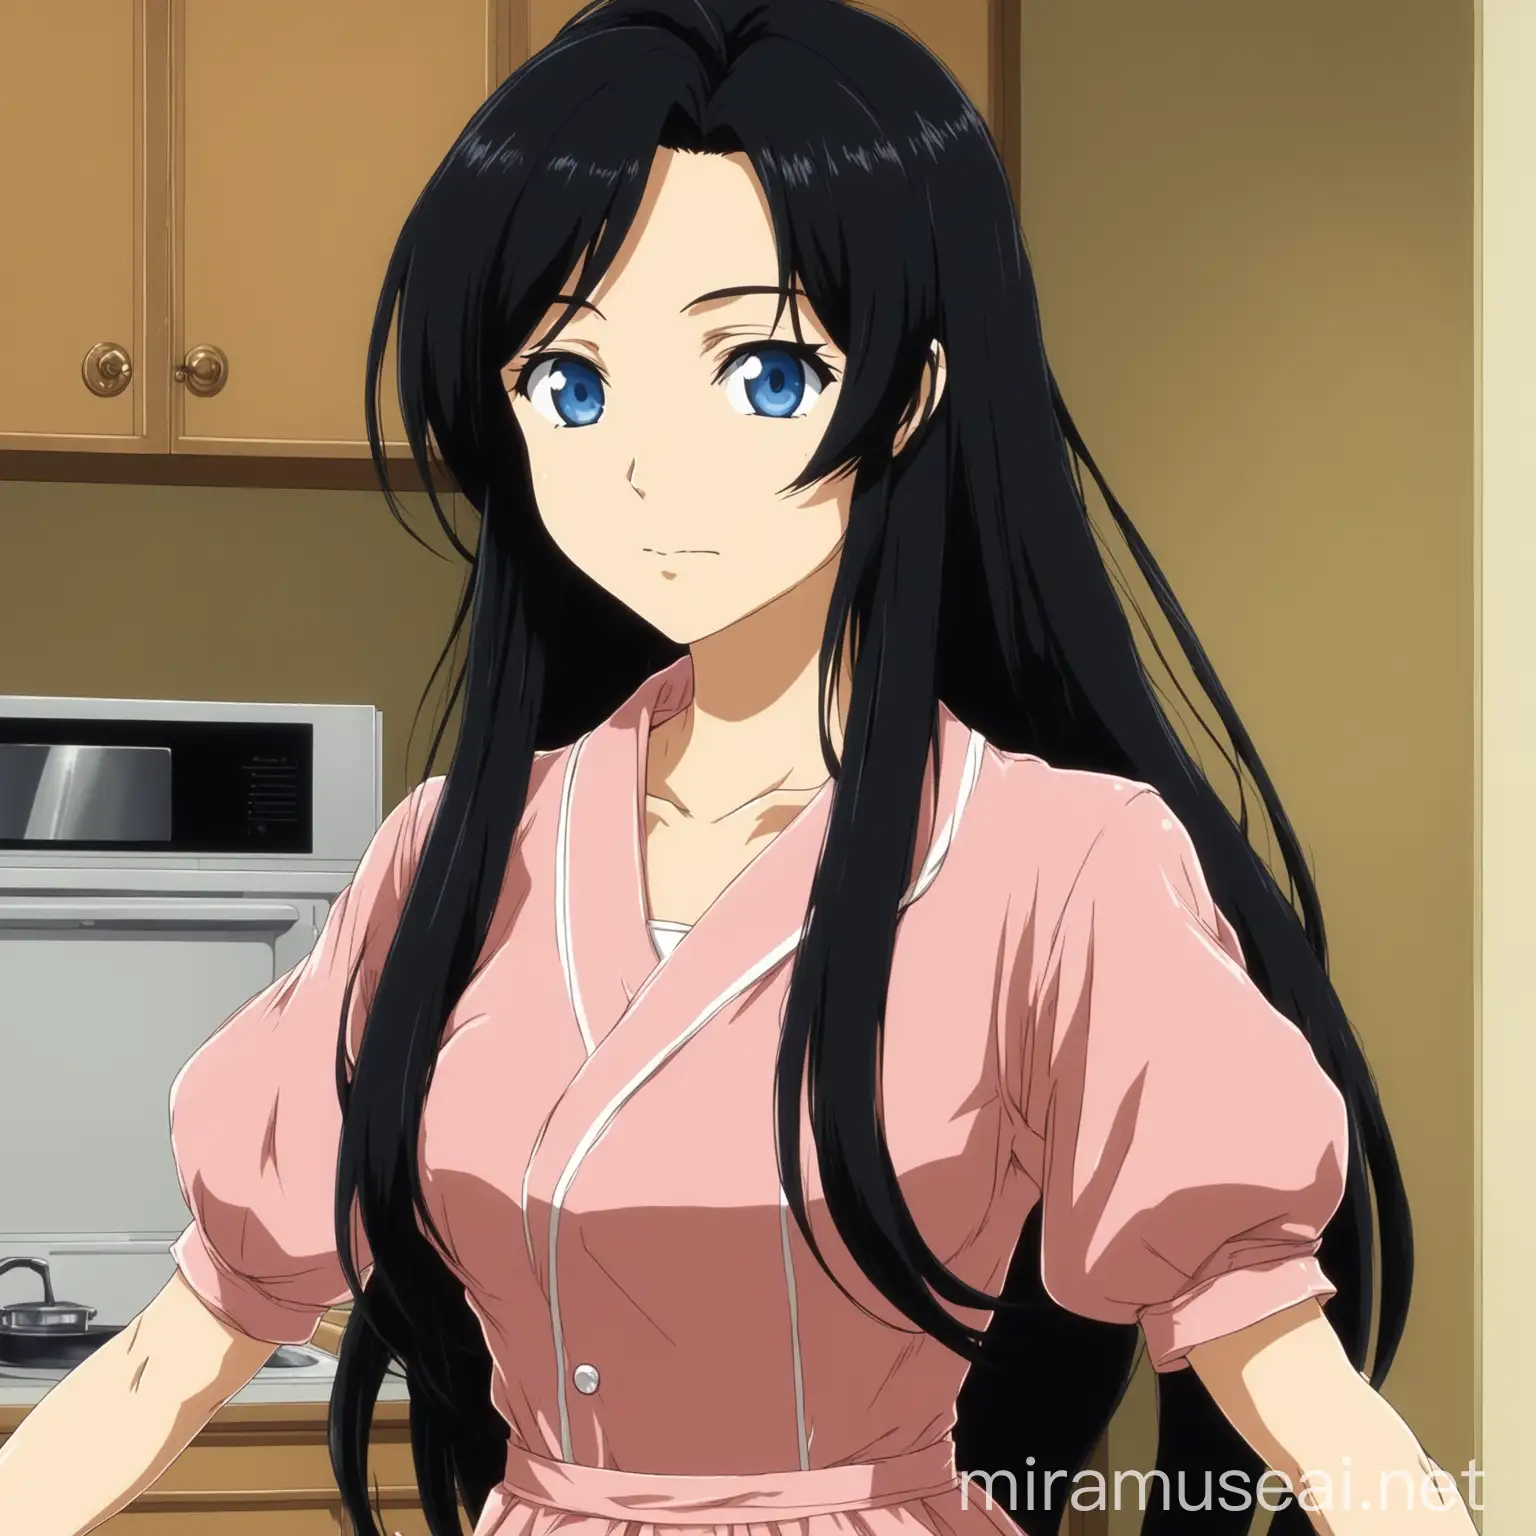 30 year old anime housewife with black long hair 